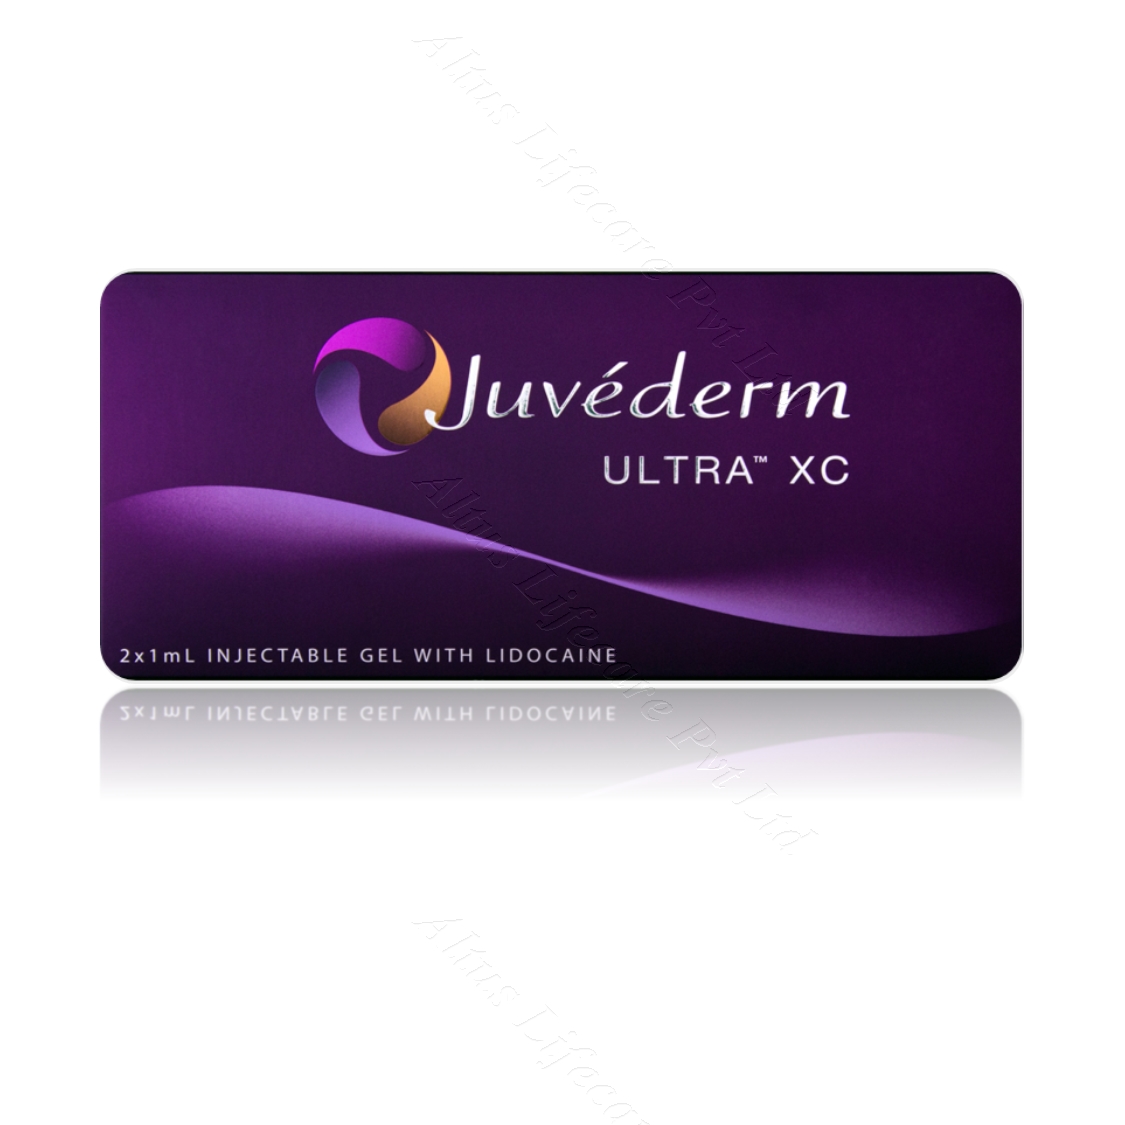 "Juvederm Ultra XC: Unleash Your Natural Beauty"